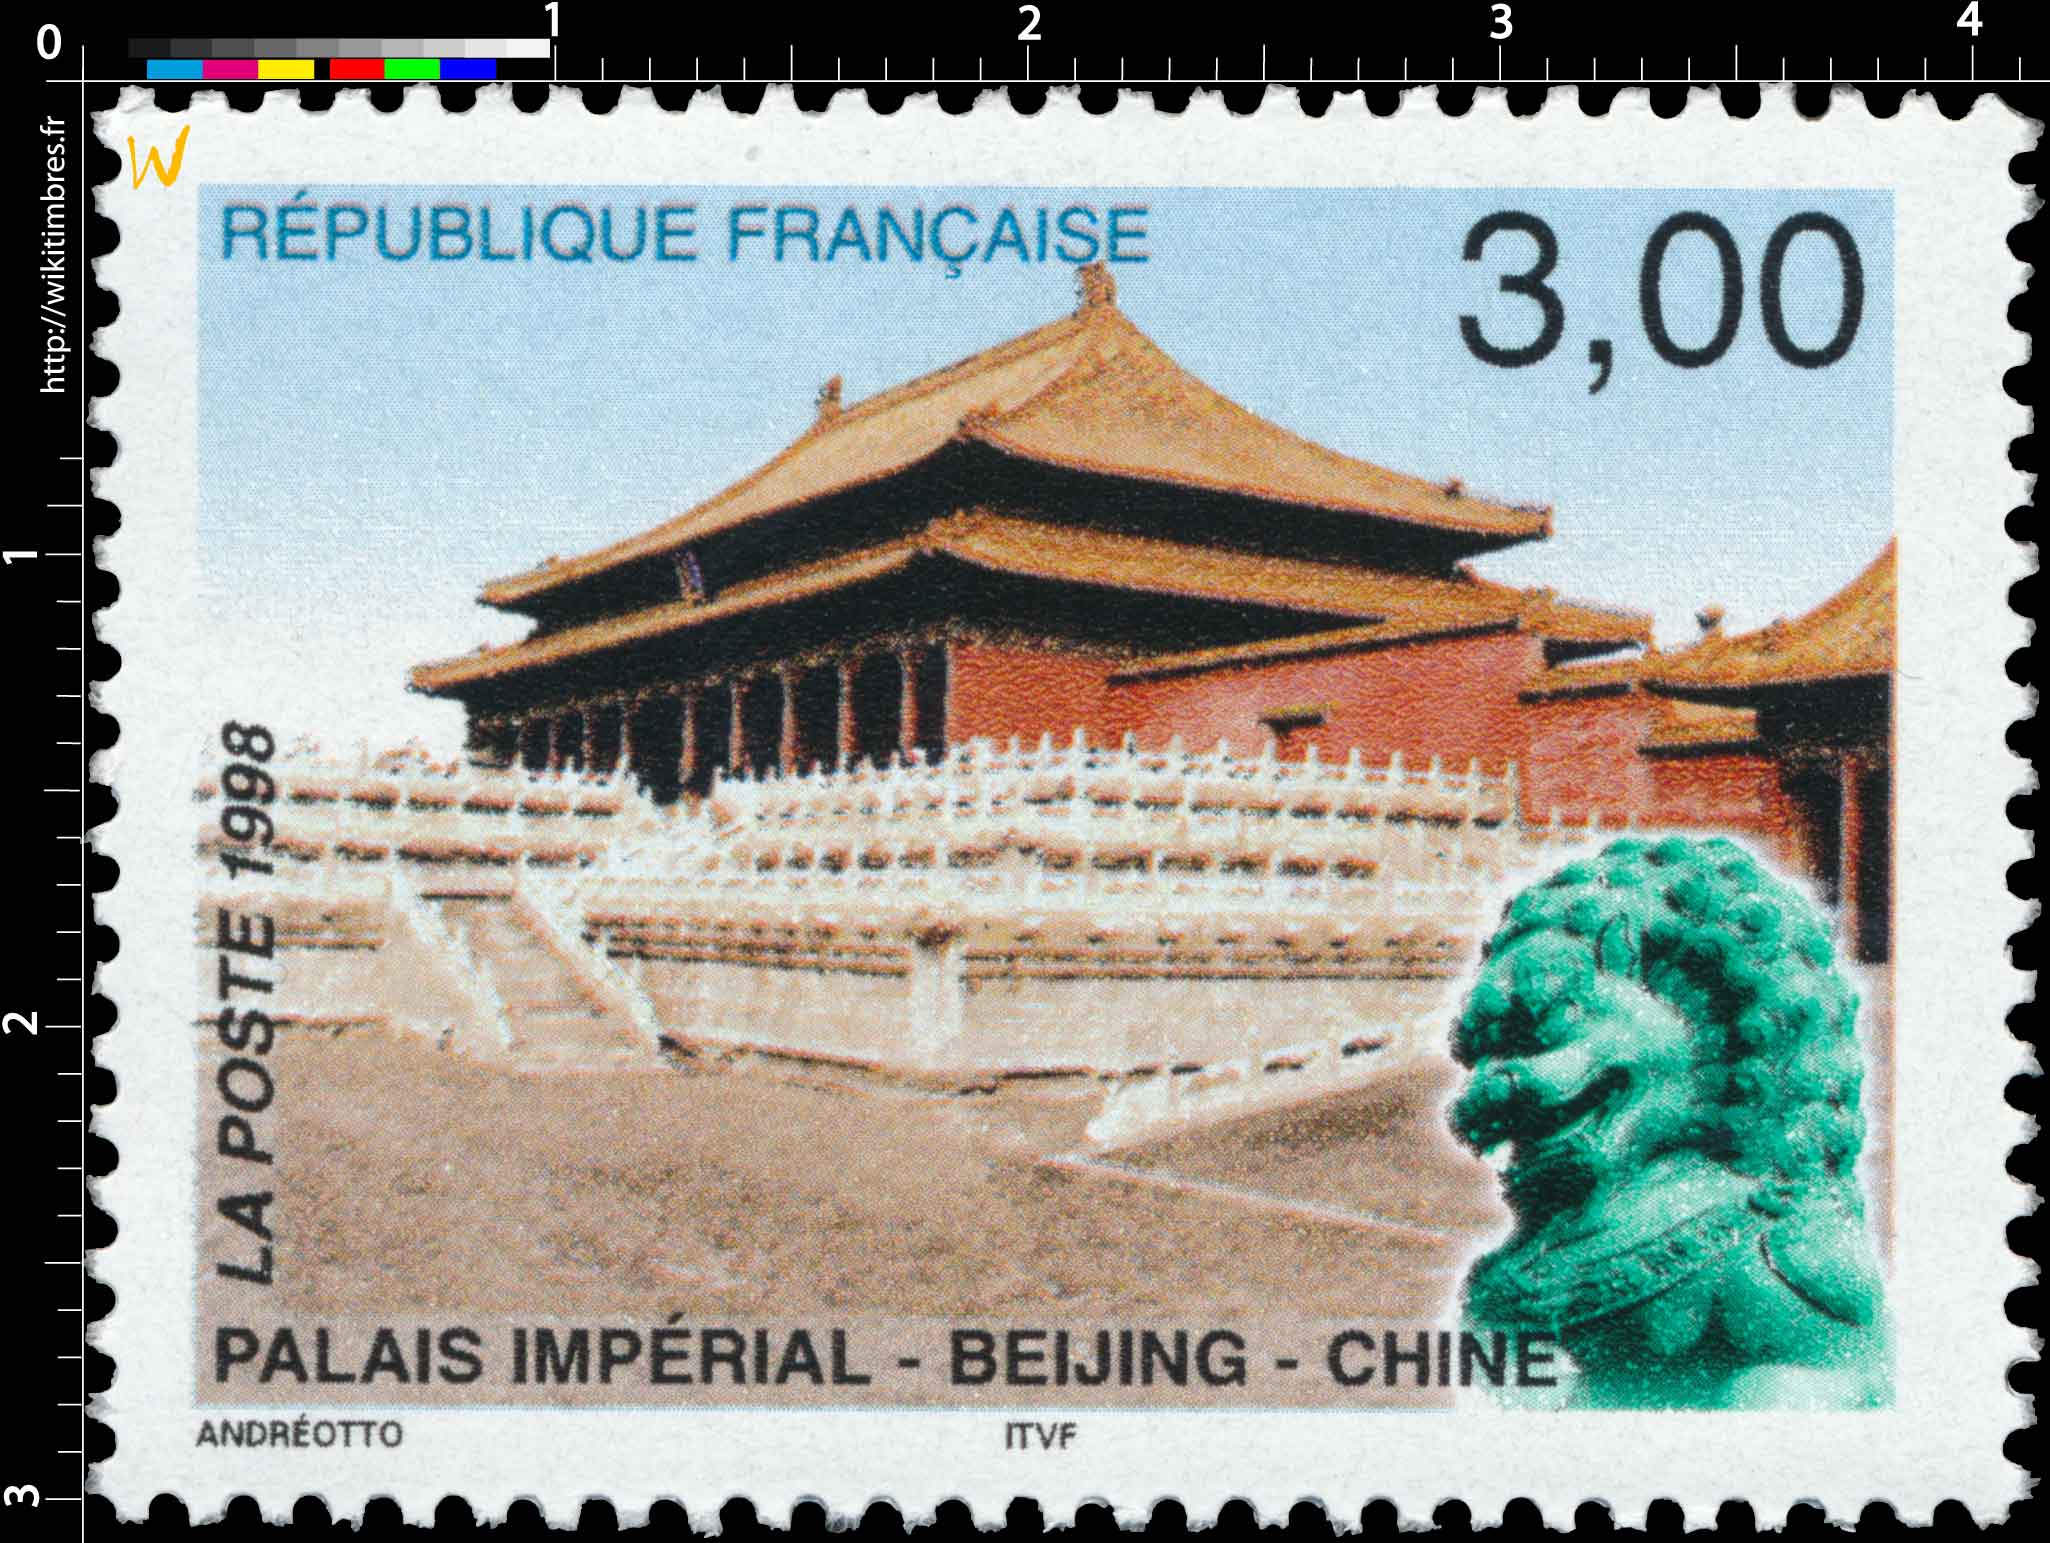 1998 PALAIS IMPERIAL - BEIJING - CHINE